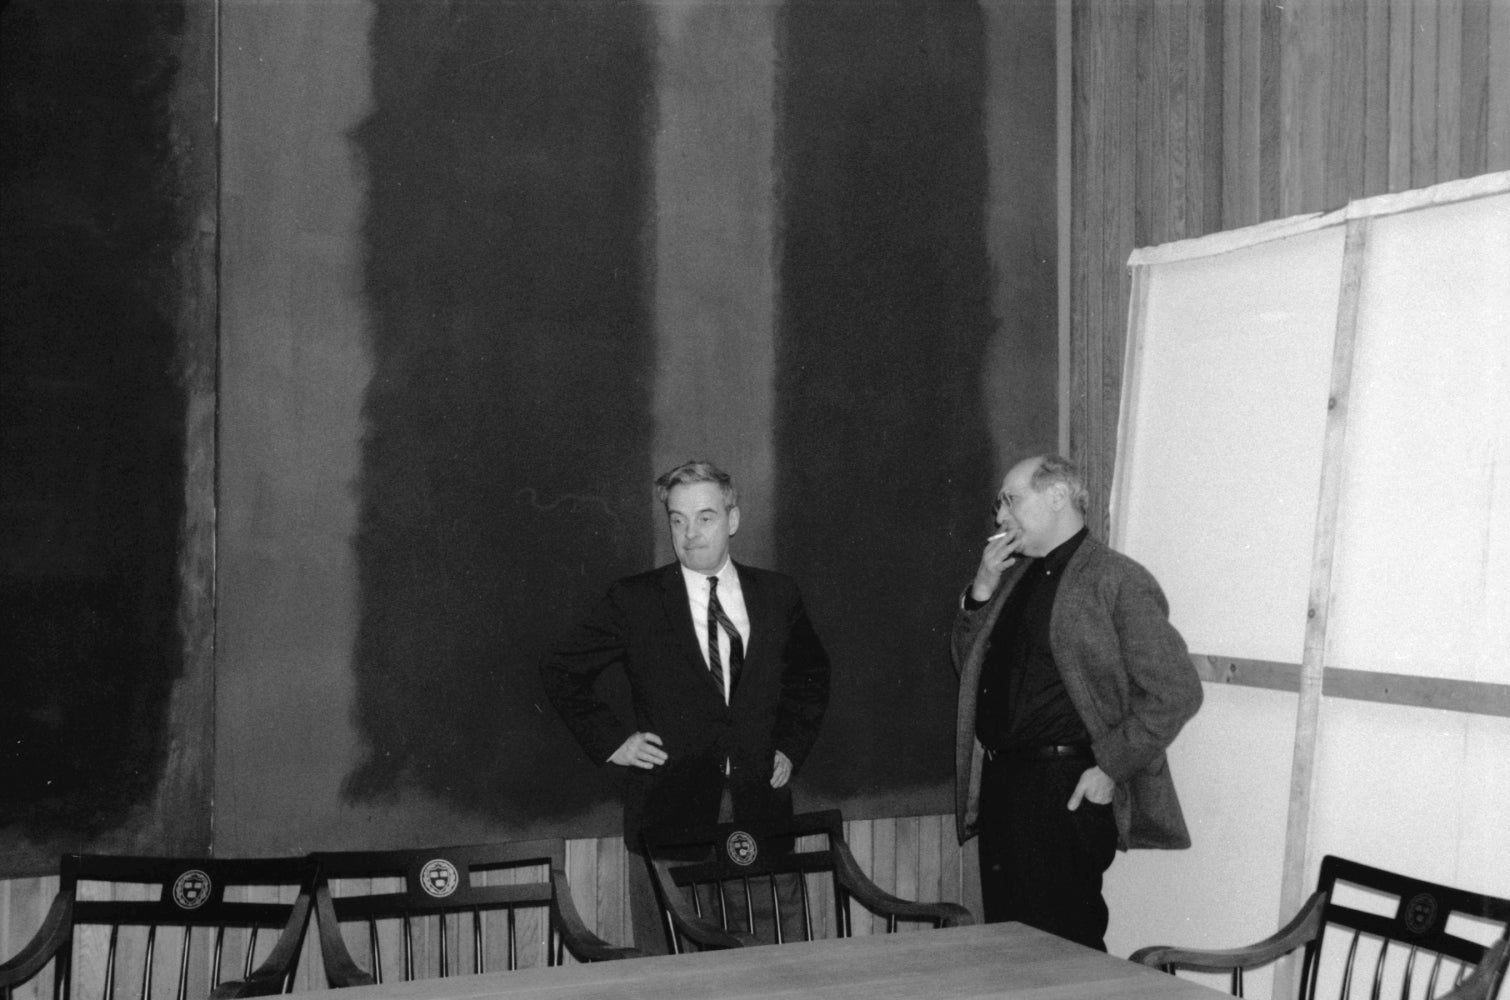 John Coolidge, former director of the Fogg Museum, and Mark Rothko (right) in front of "Panel Two" and "Panel Three" of the Harvard murals on the tenth floor of Harvard’s Holyoke Center, 1963. © 2009 Kate Rothko Prizel and Christopher Rothko / Artists Rights Society (ARS), New York. Elizabeth H. Jones, ©President and Fellows of Harvard College